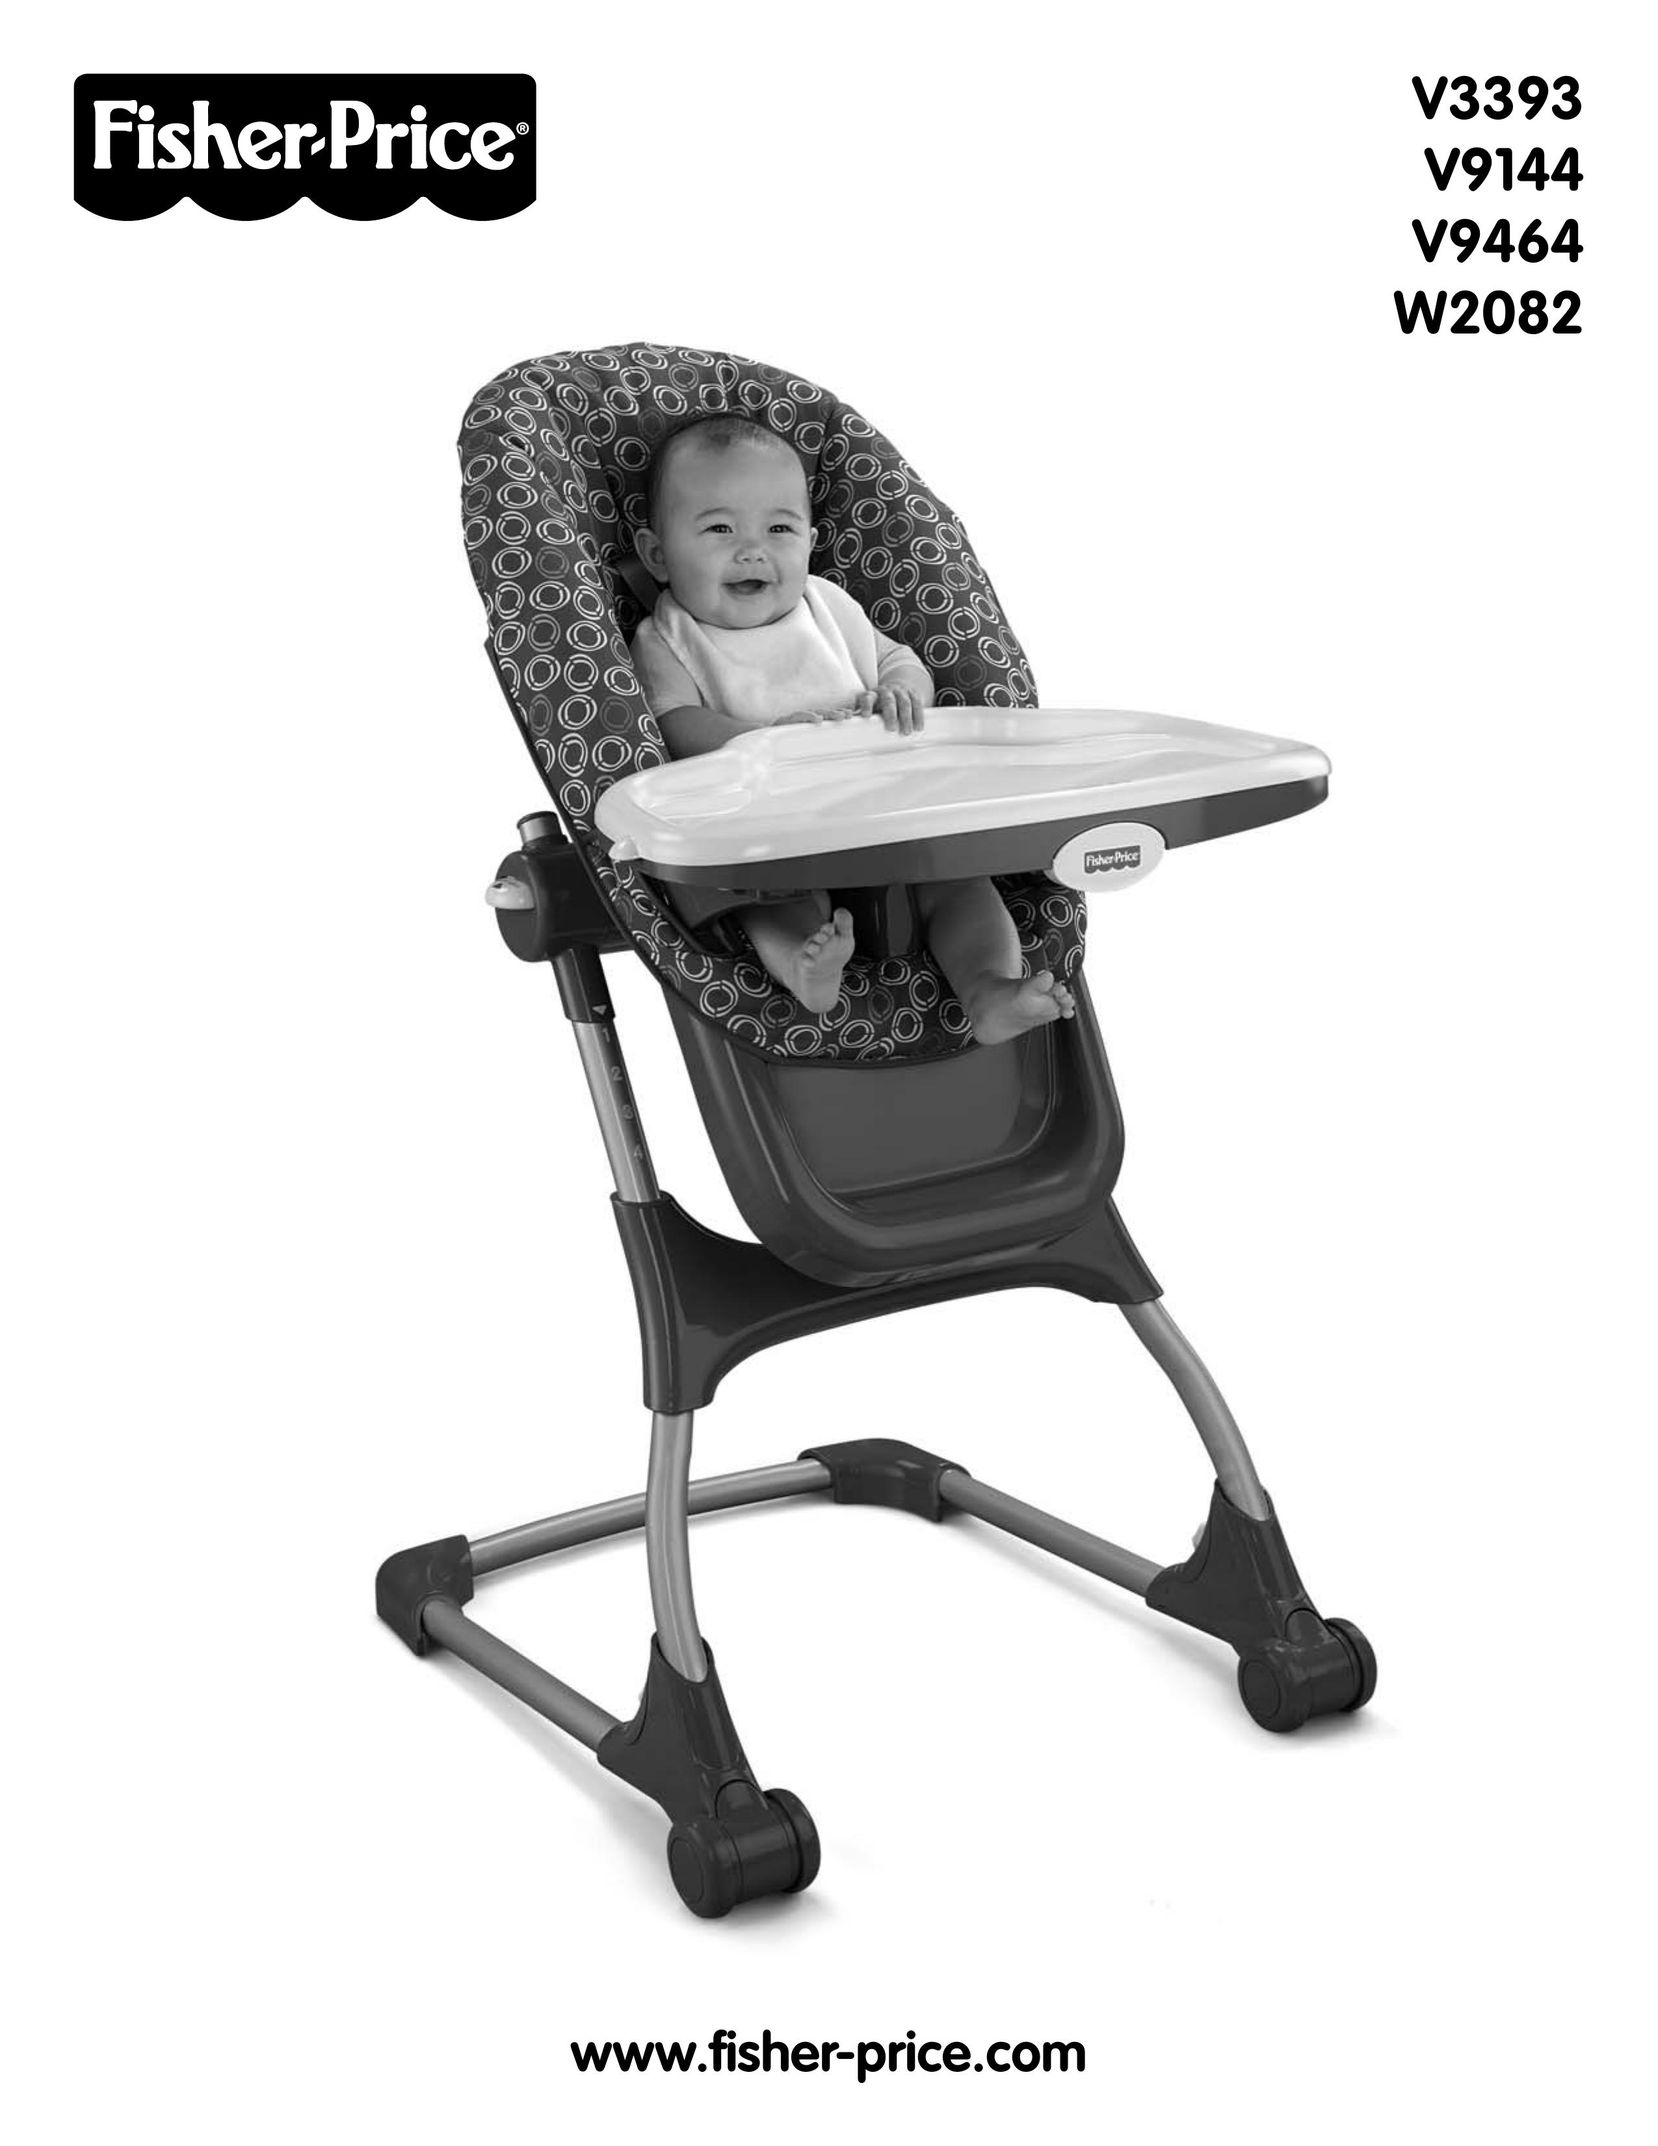 Fisher-Price V9464 High Chair User Manual